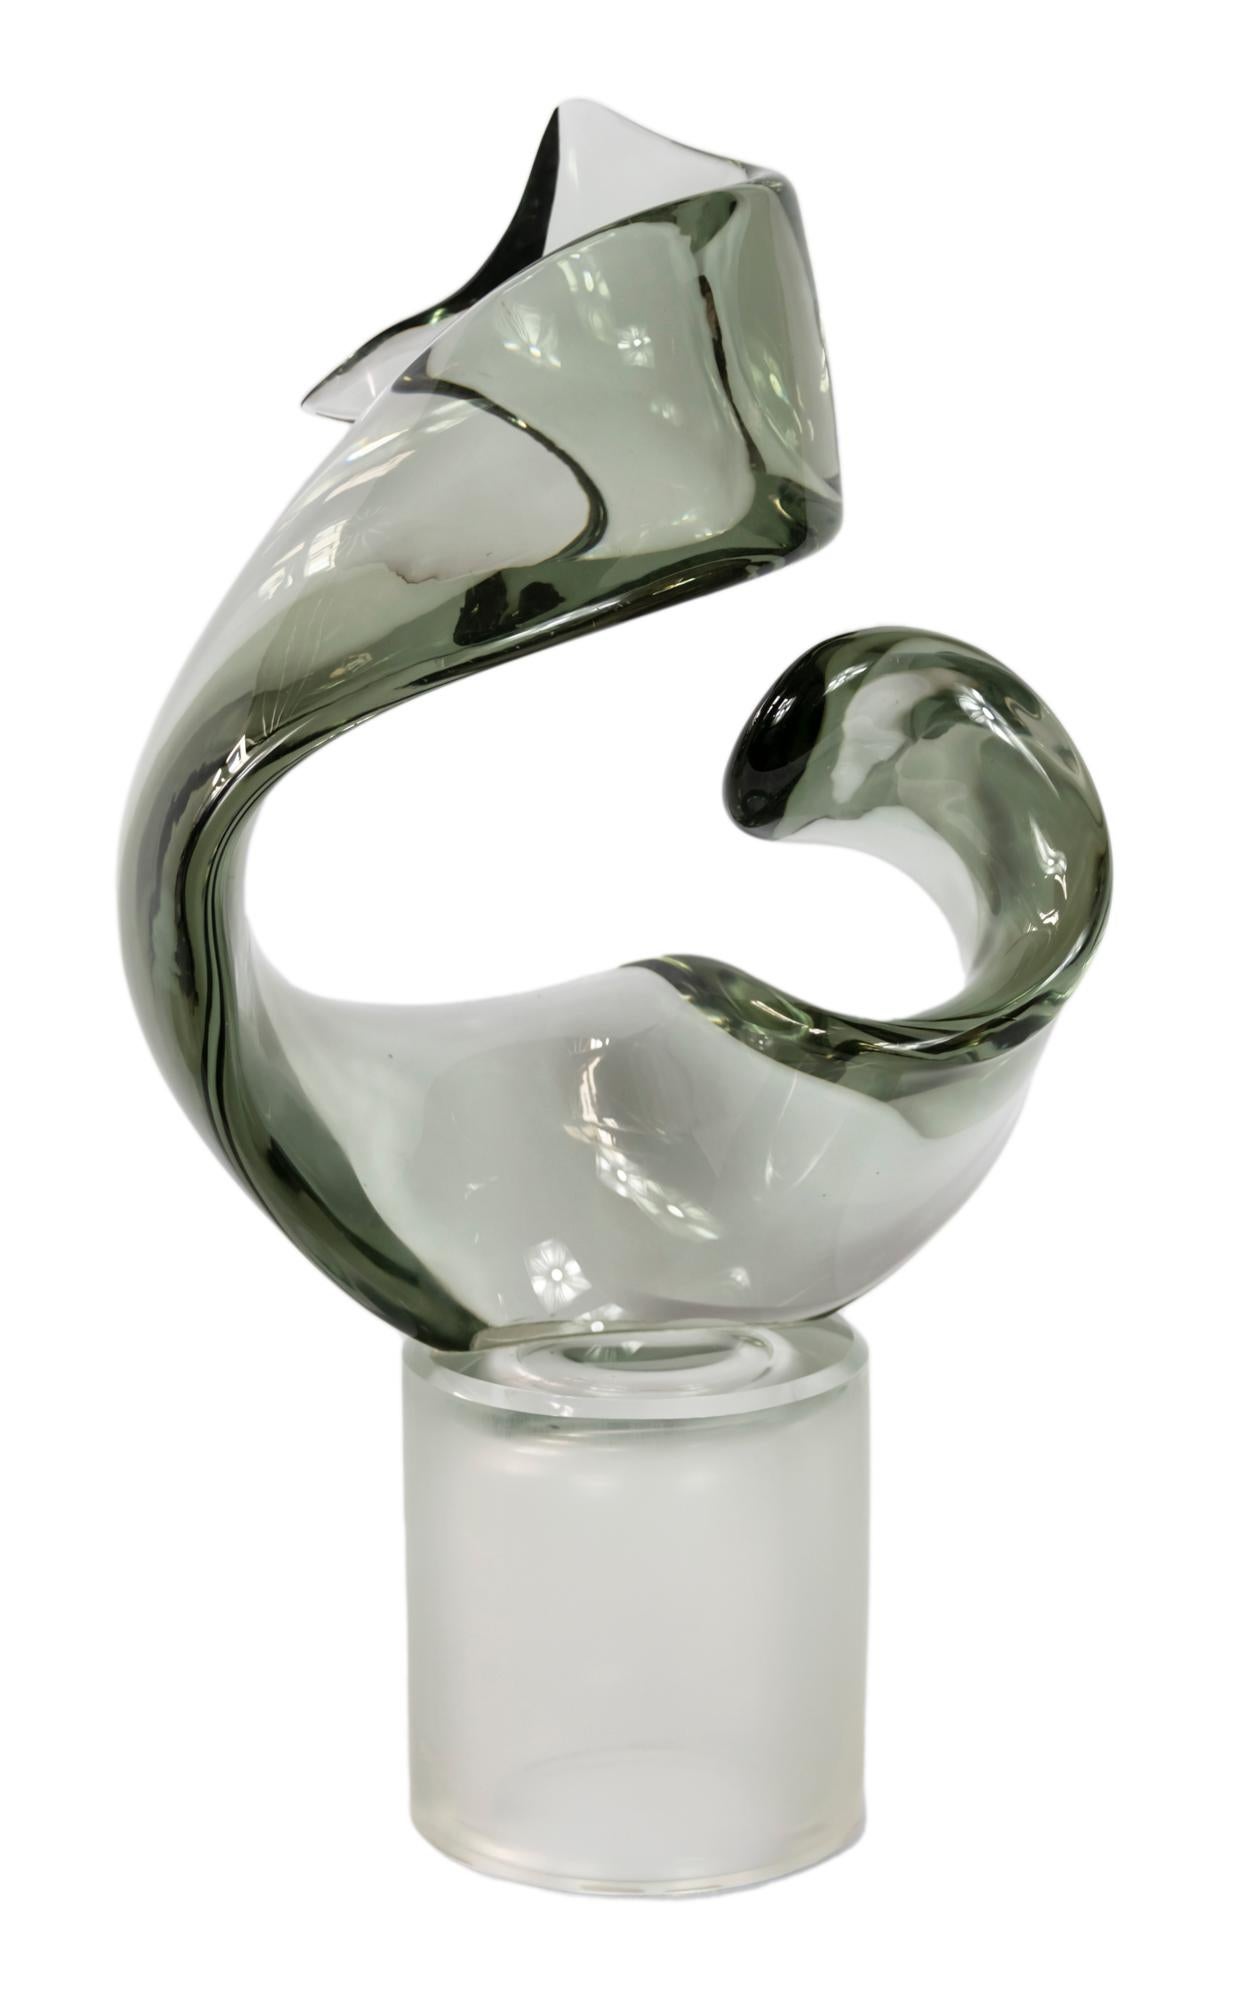 Italian handmade Murano glass abstract design sculpture.
Created and signed by L. de Roi.
The base is round in frosted color glass. There is a small outlet on the base for the lighting function.
The sculpture element is in clear light grey